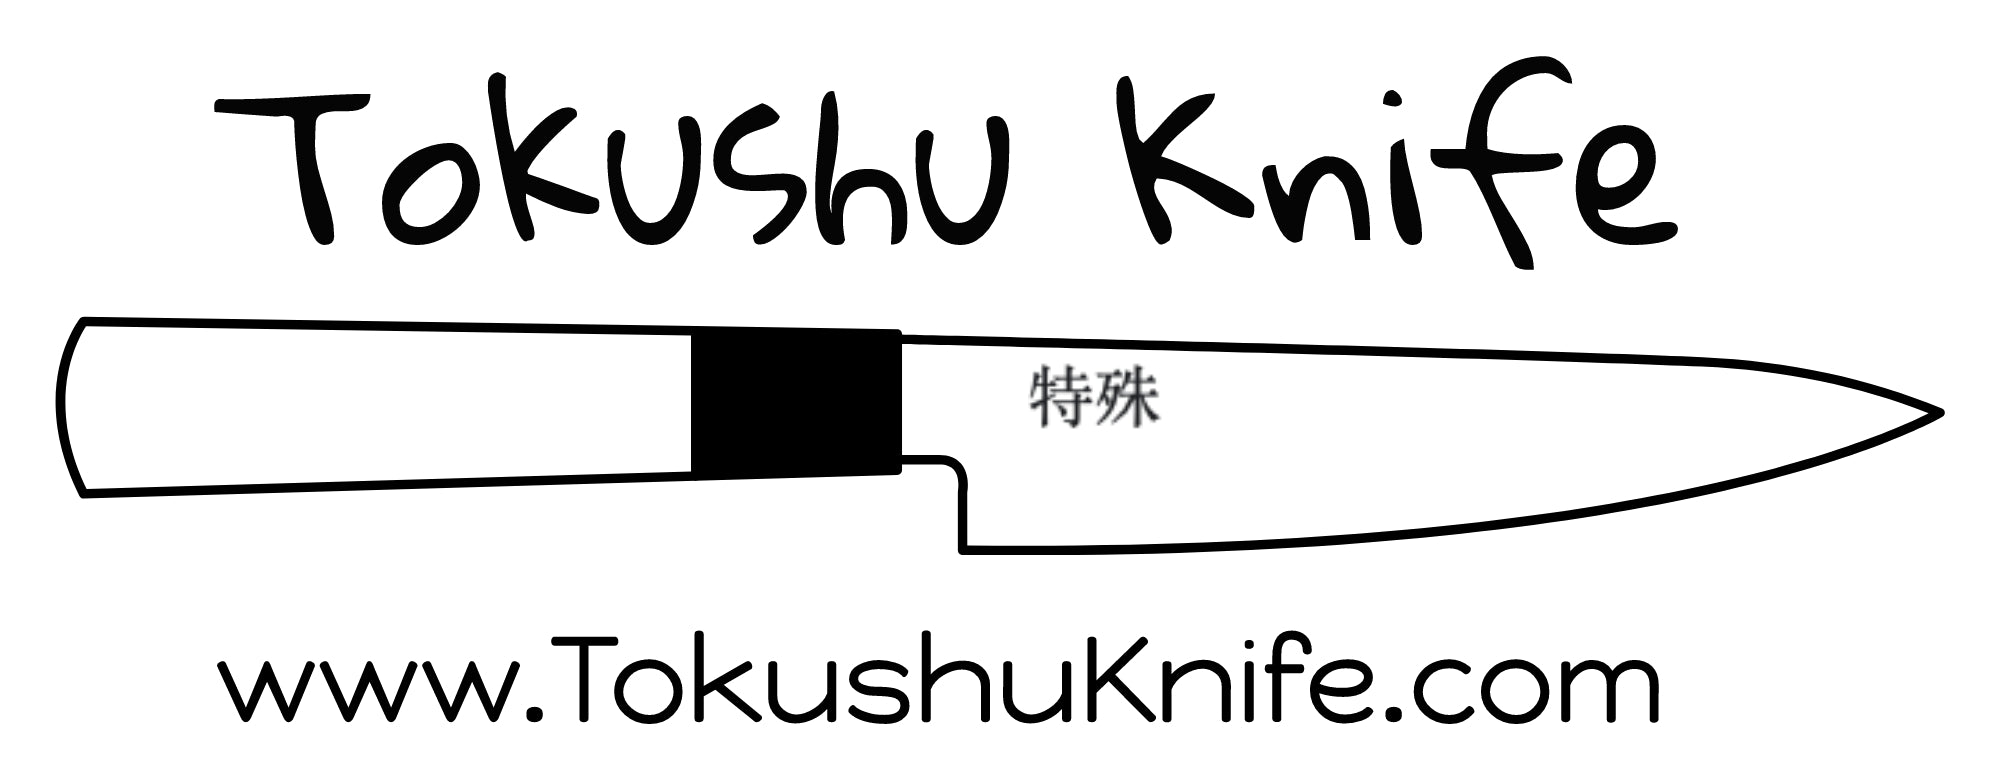 Types of Japanese Kitchen Knives, Buying Guide